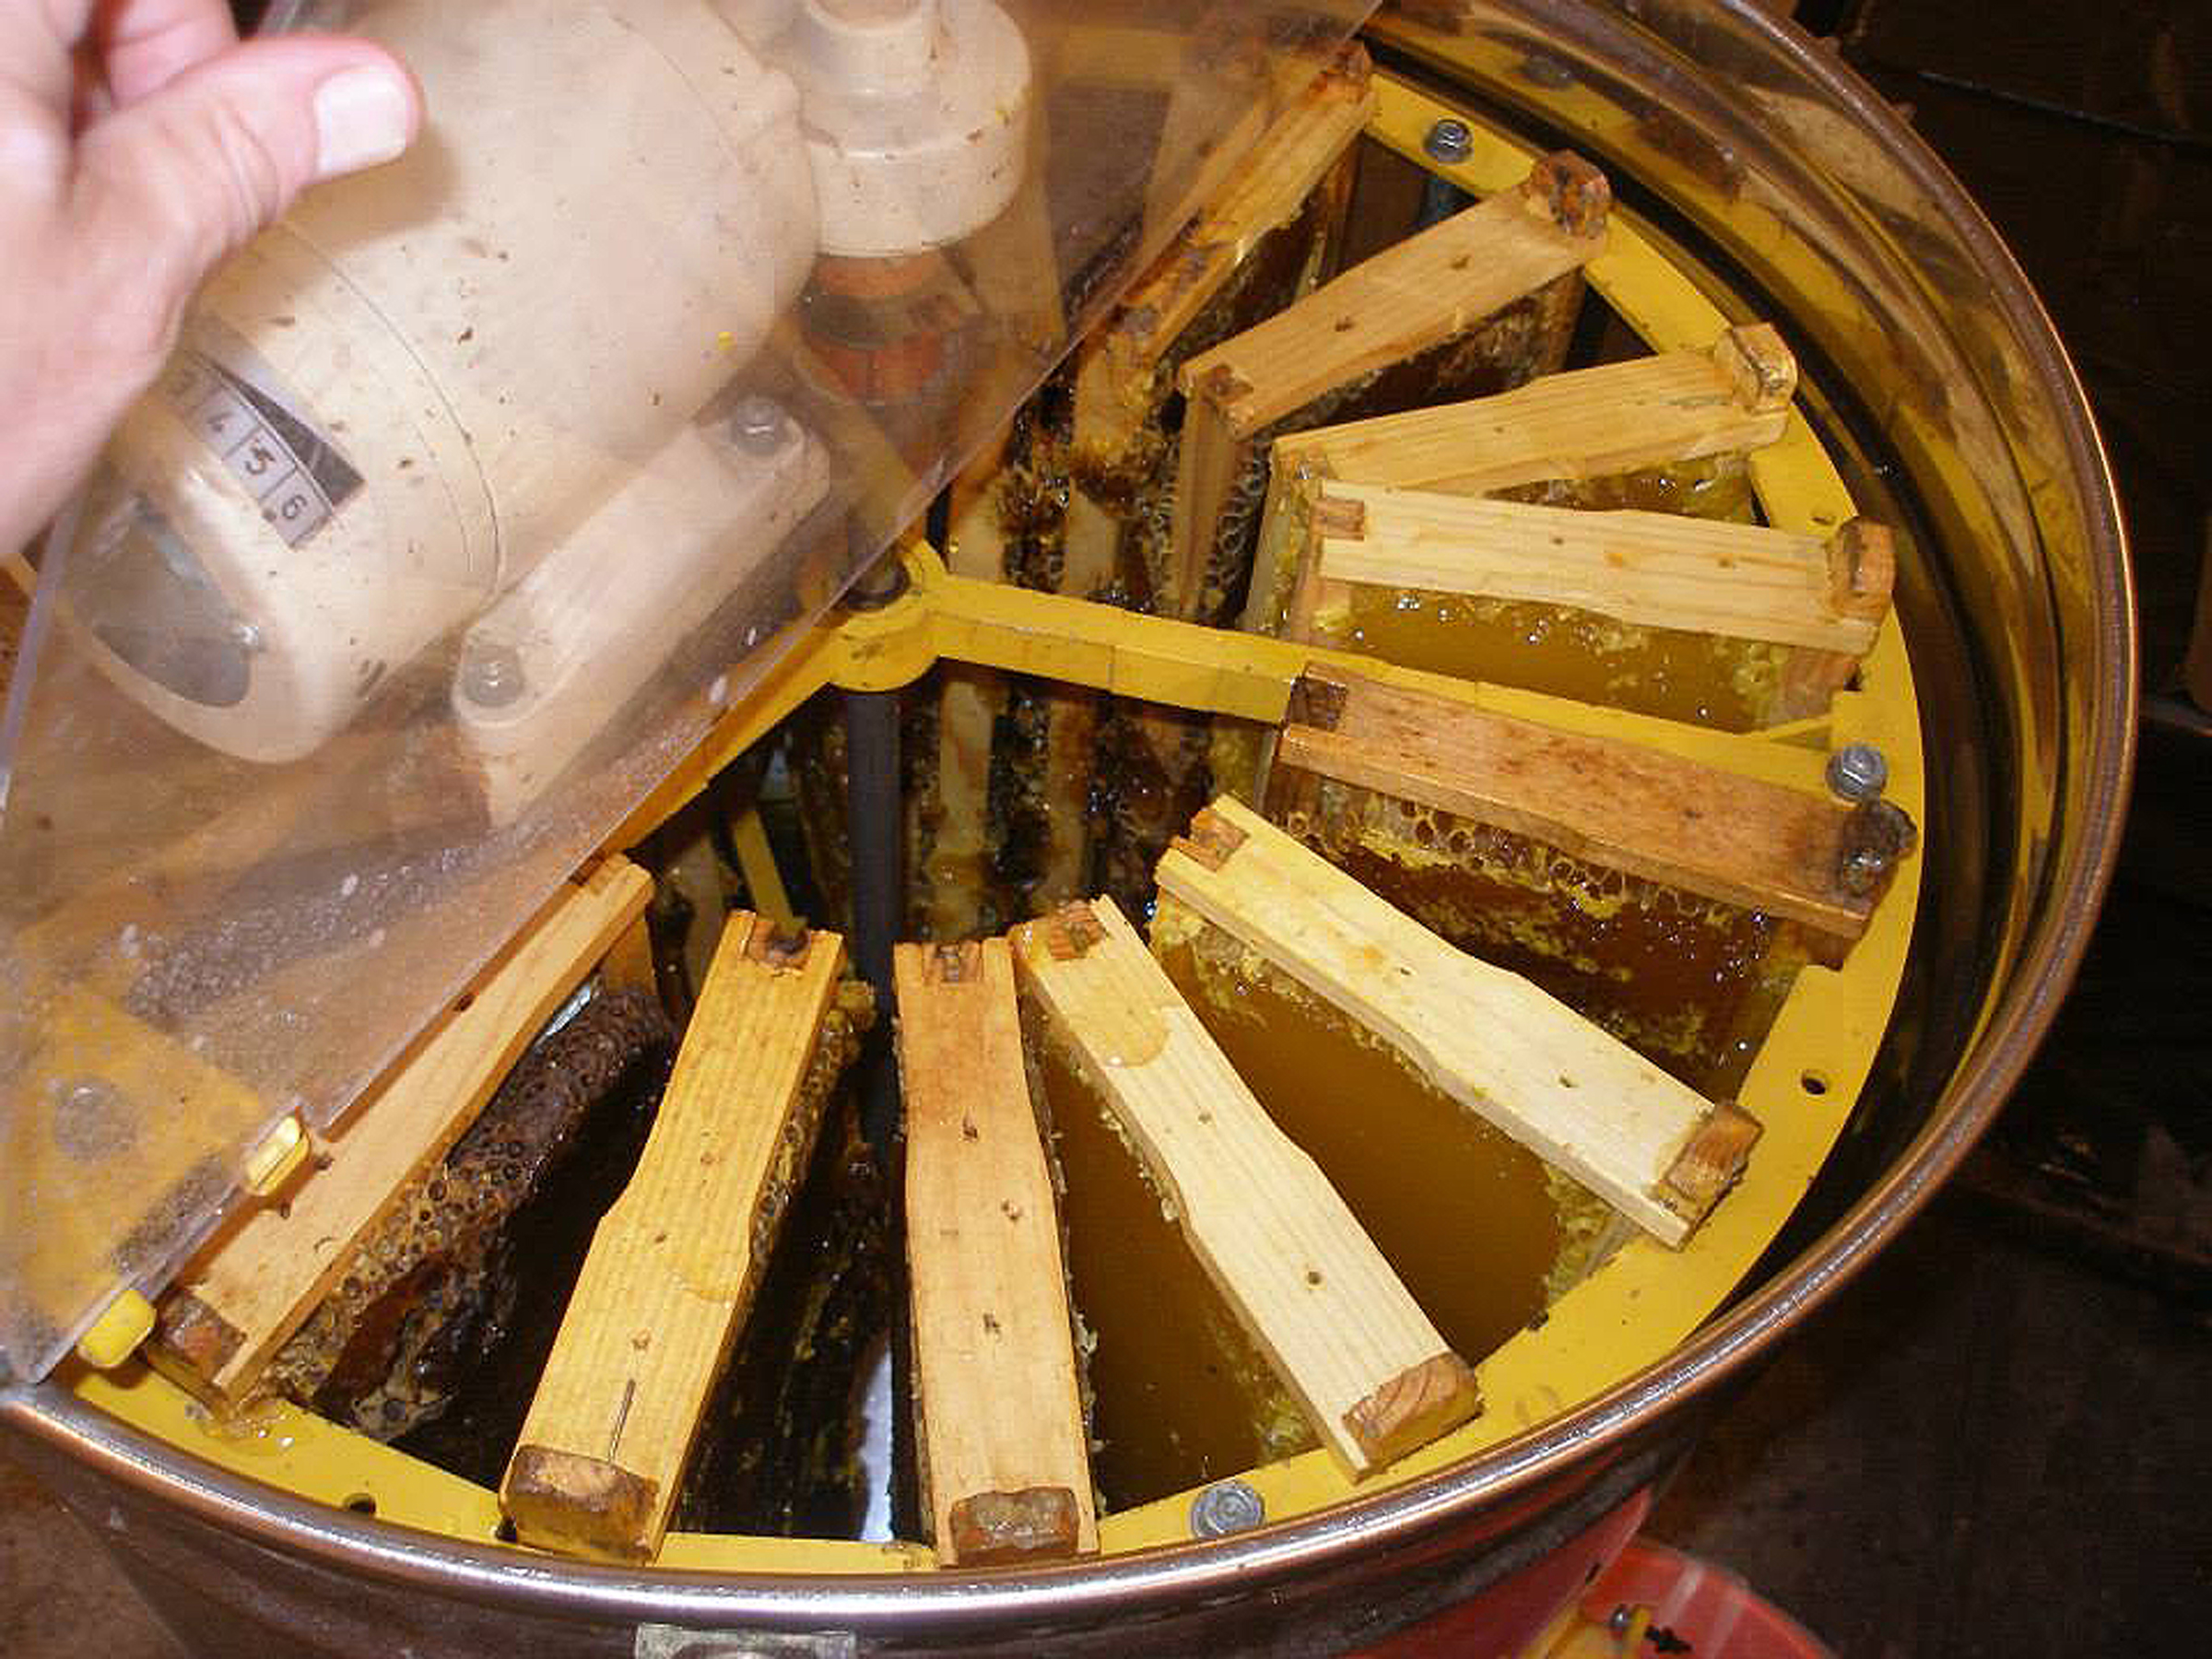 The extractor filled with supers full of honey ready to spin.